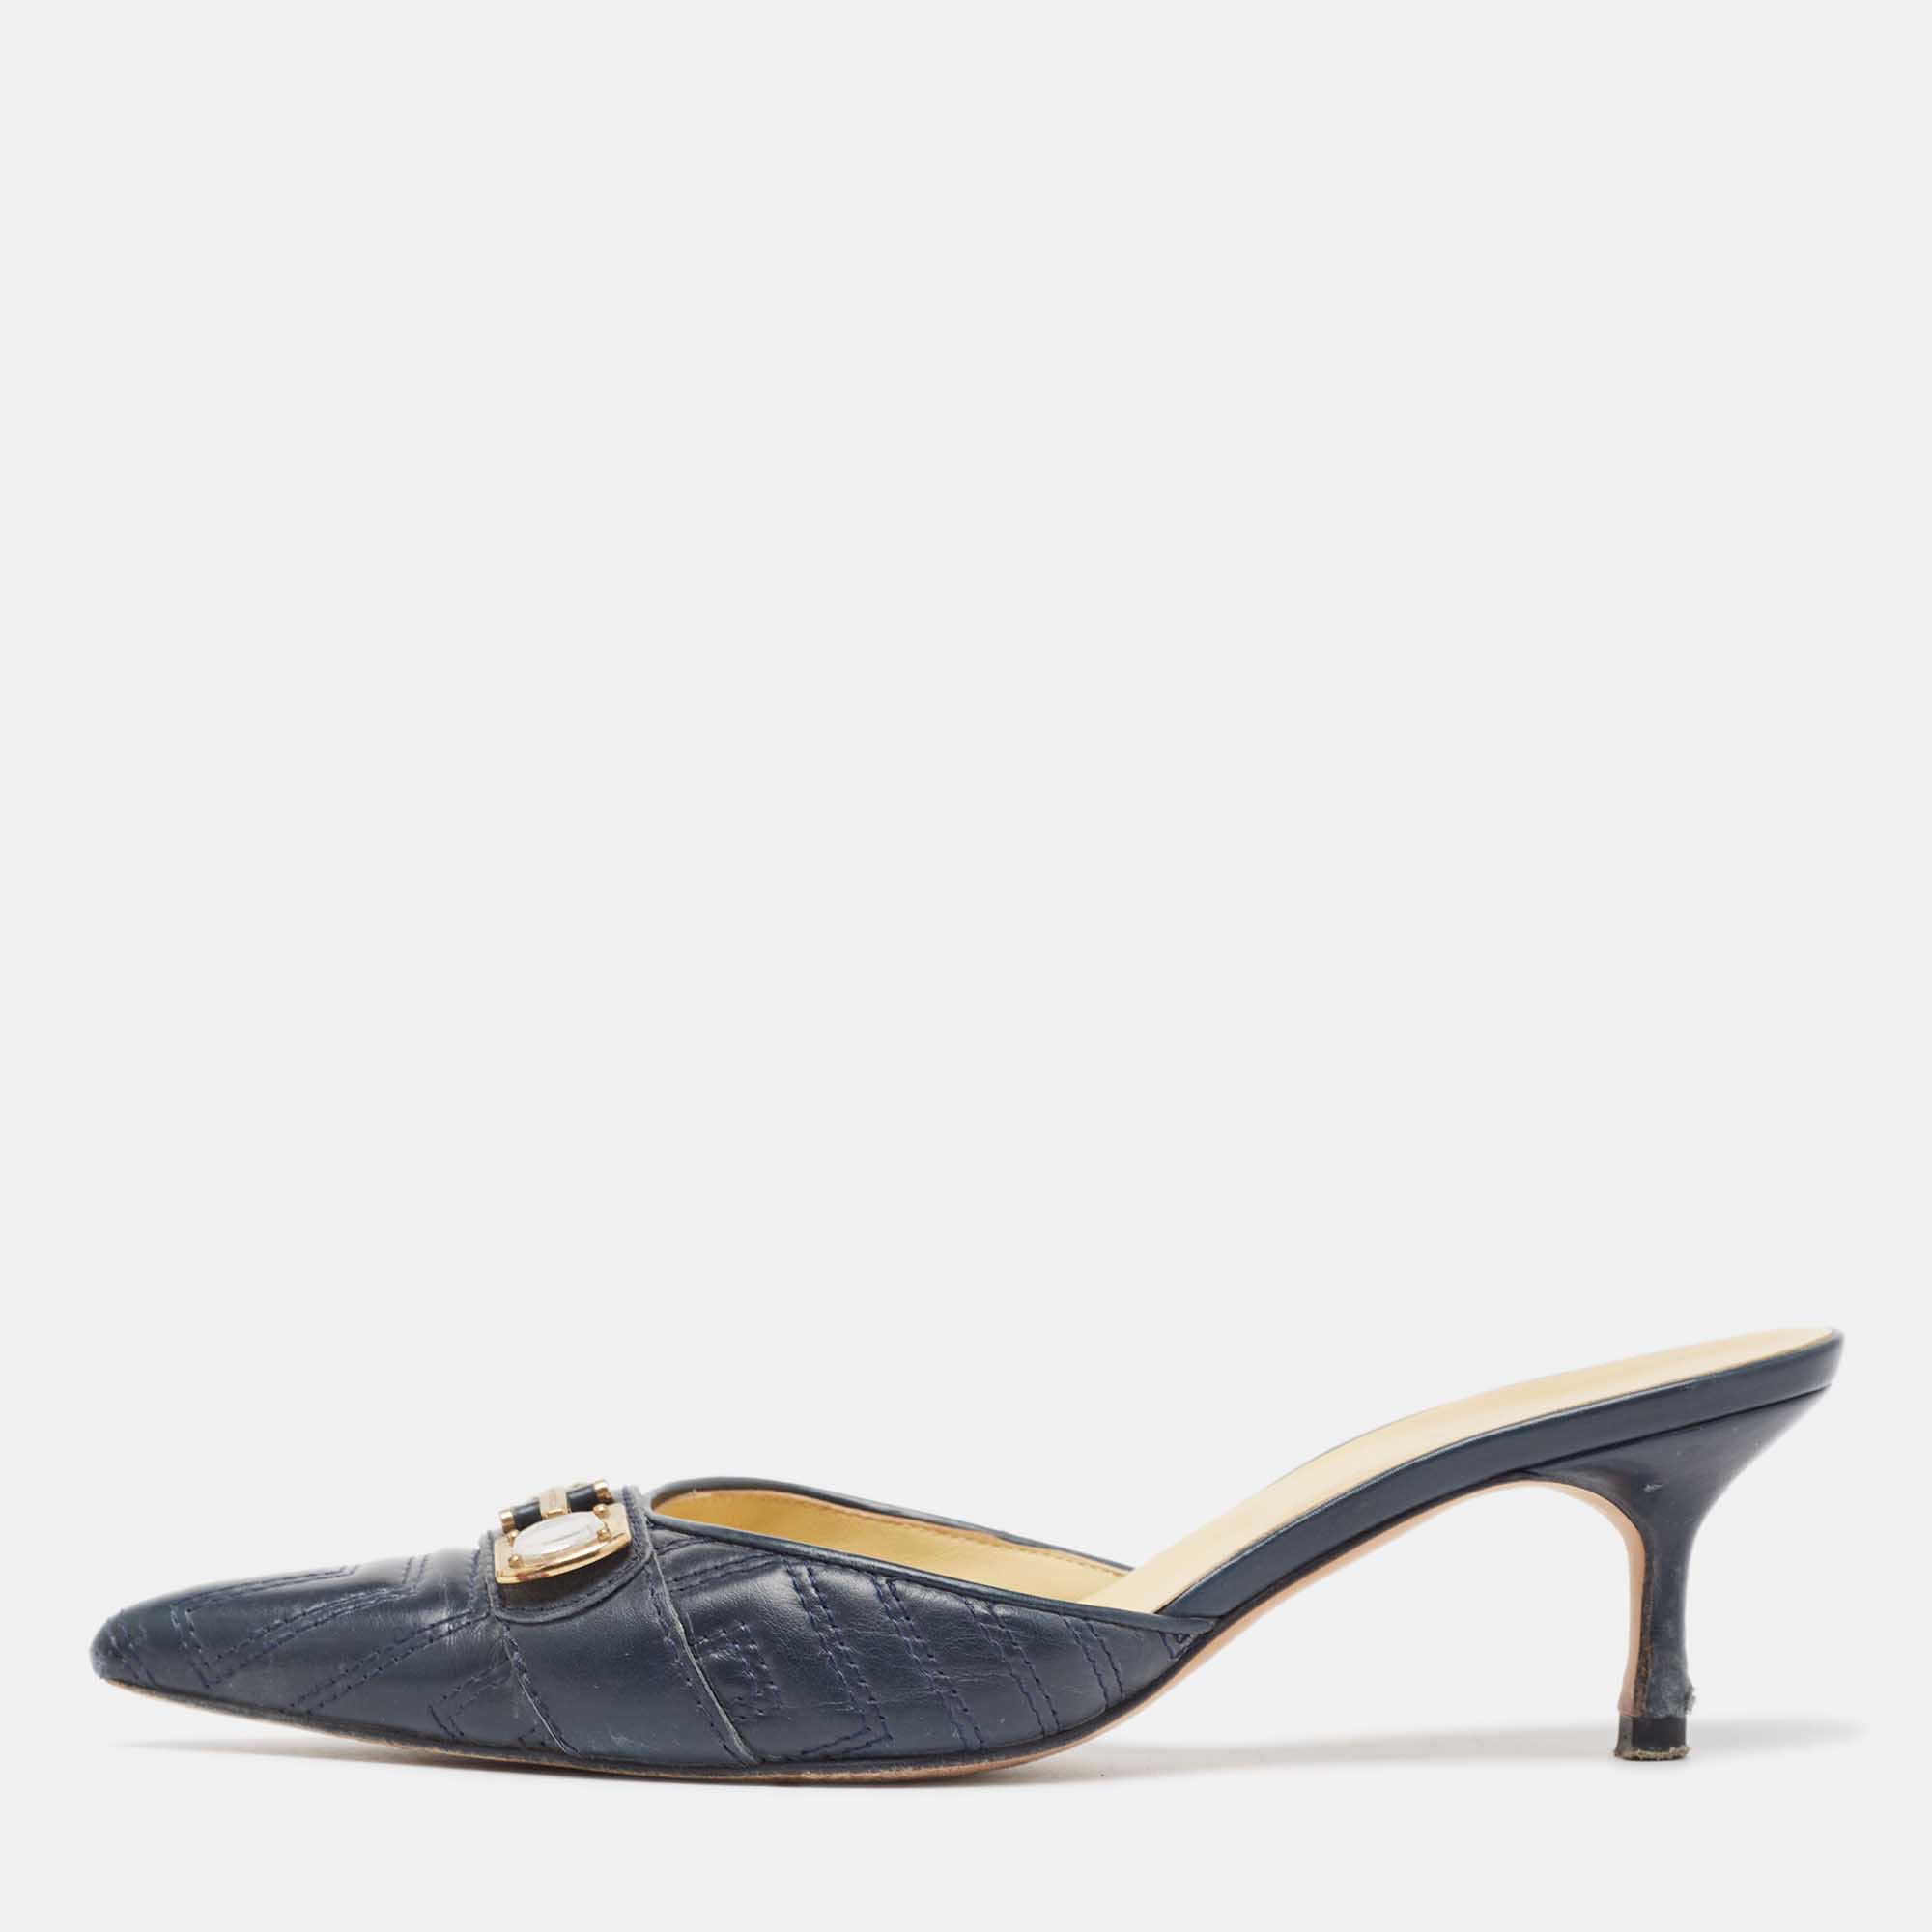 Versace navy blue quilted leather pointed toe mules size 37